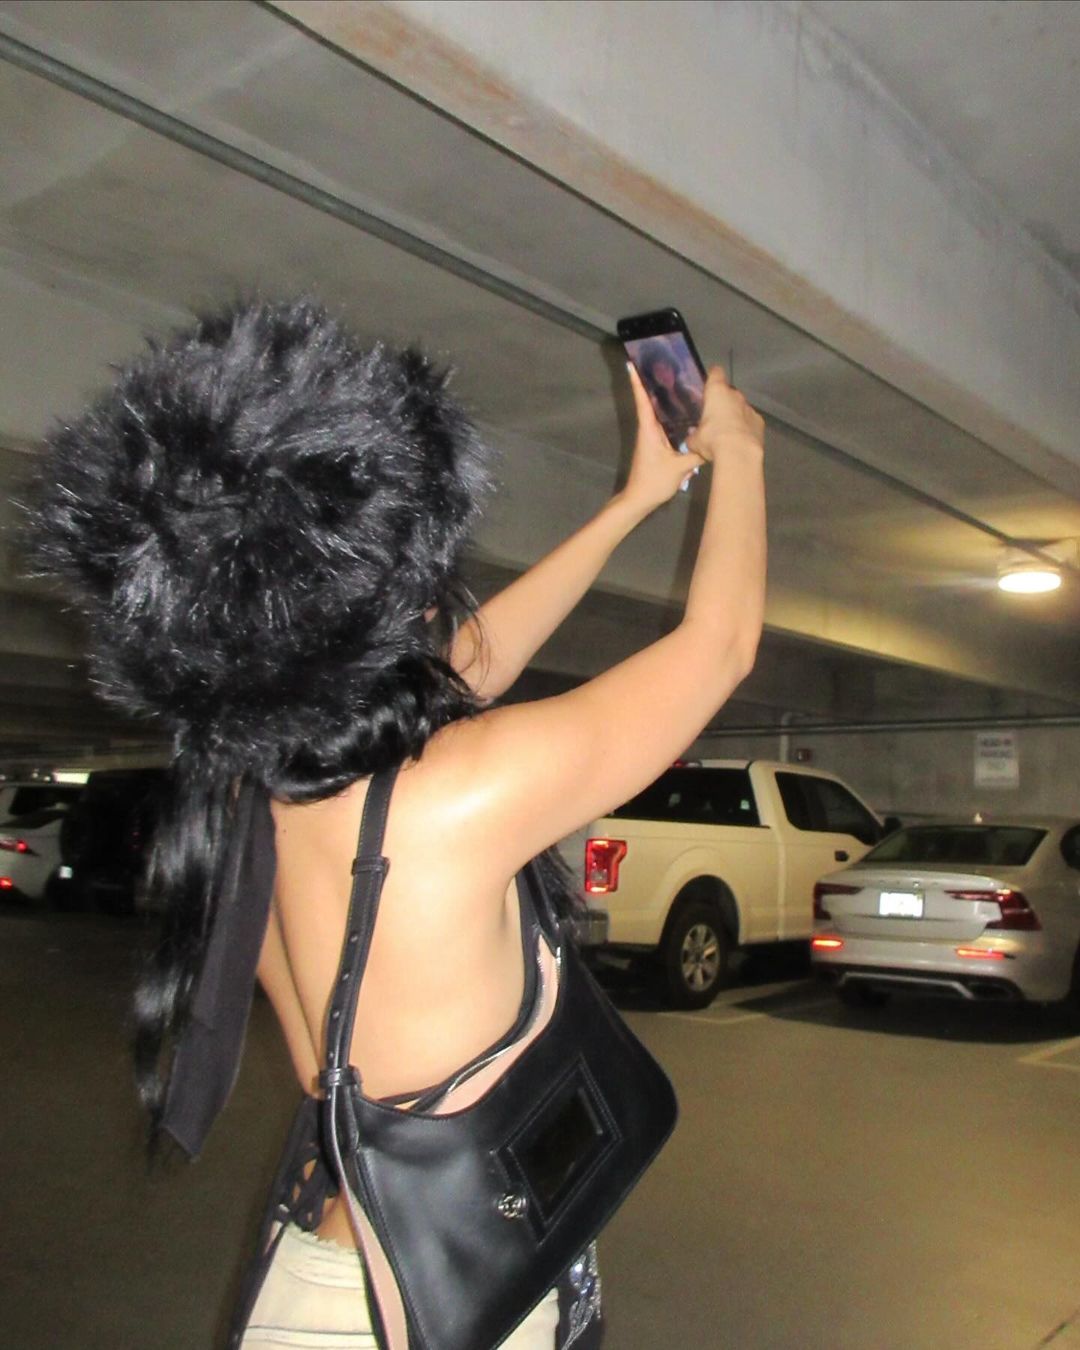 Photos n°2 : Camila Cabello Gets Cryptic in the Parking Garage!